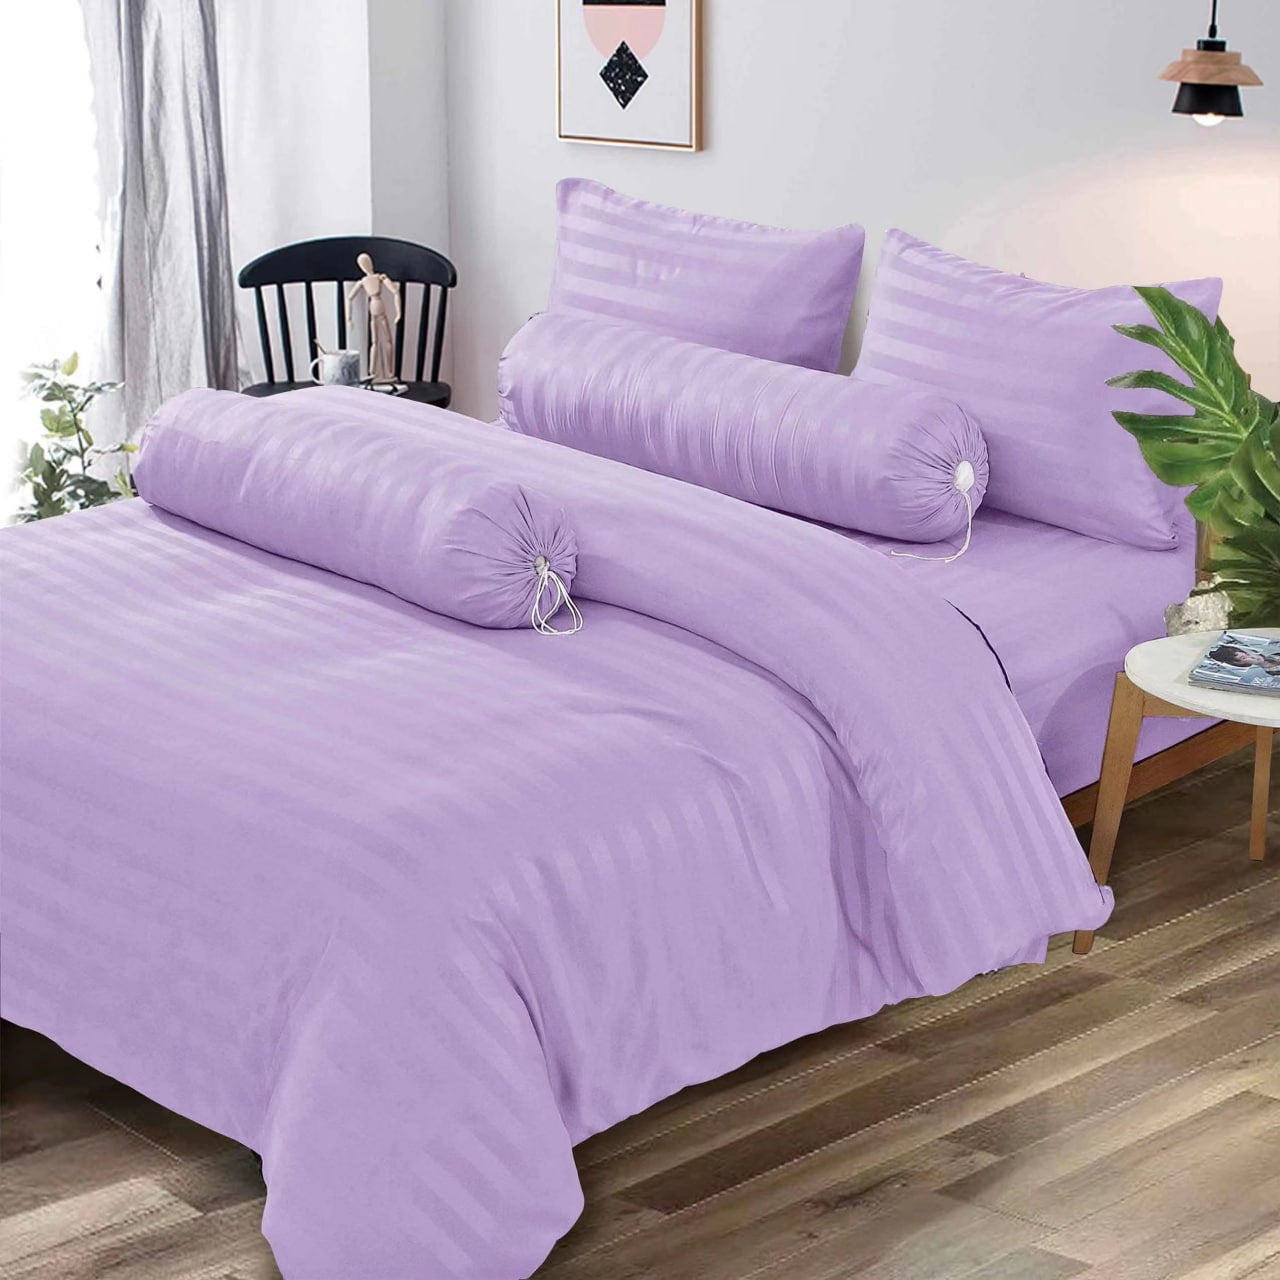 Microtex Single Bedding Set with Pillow & Bolster Case